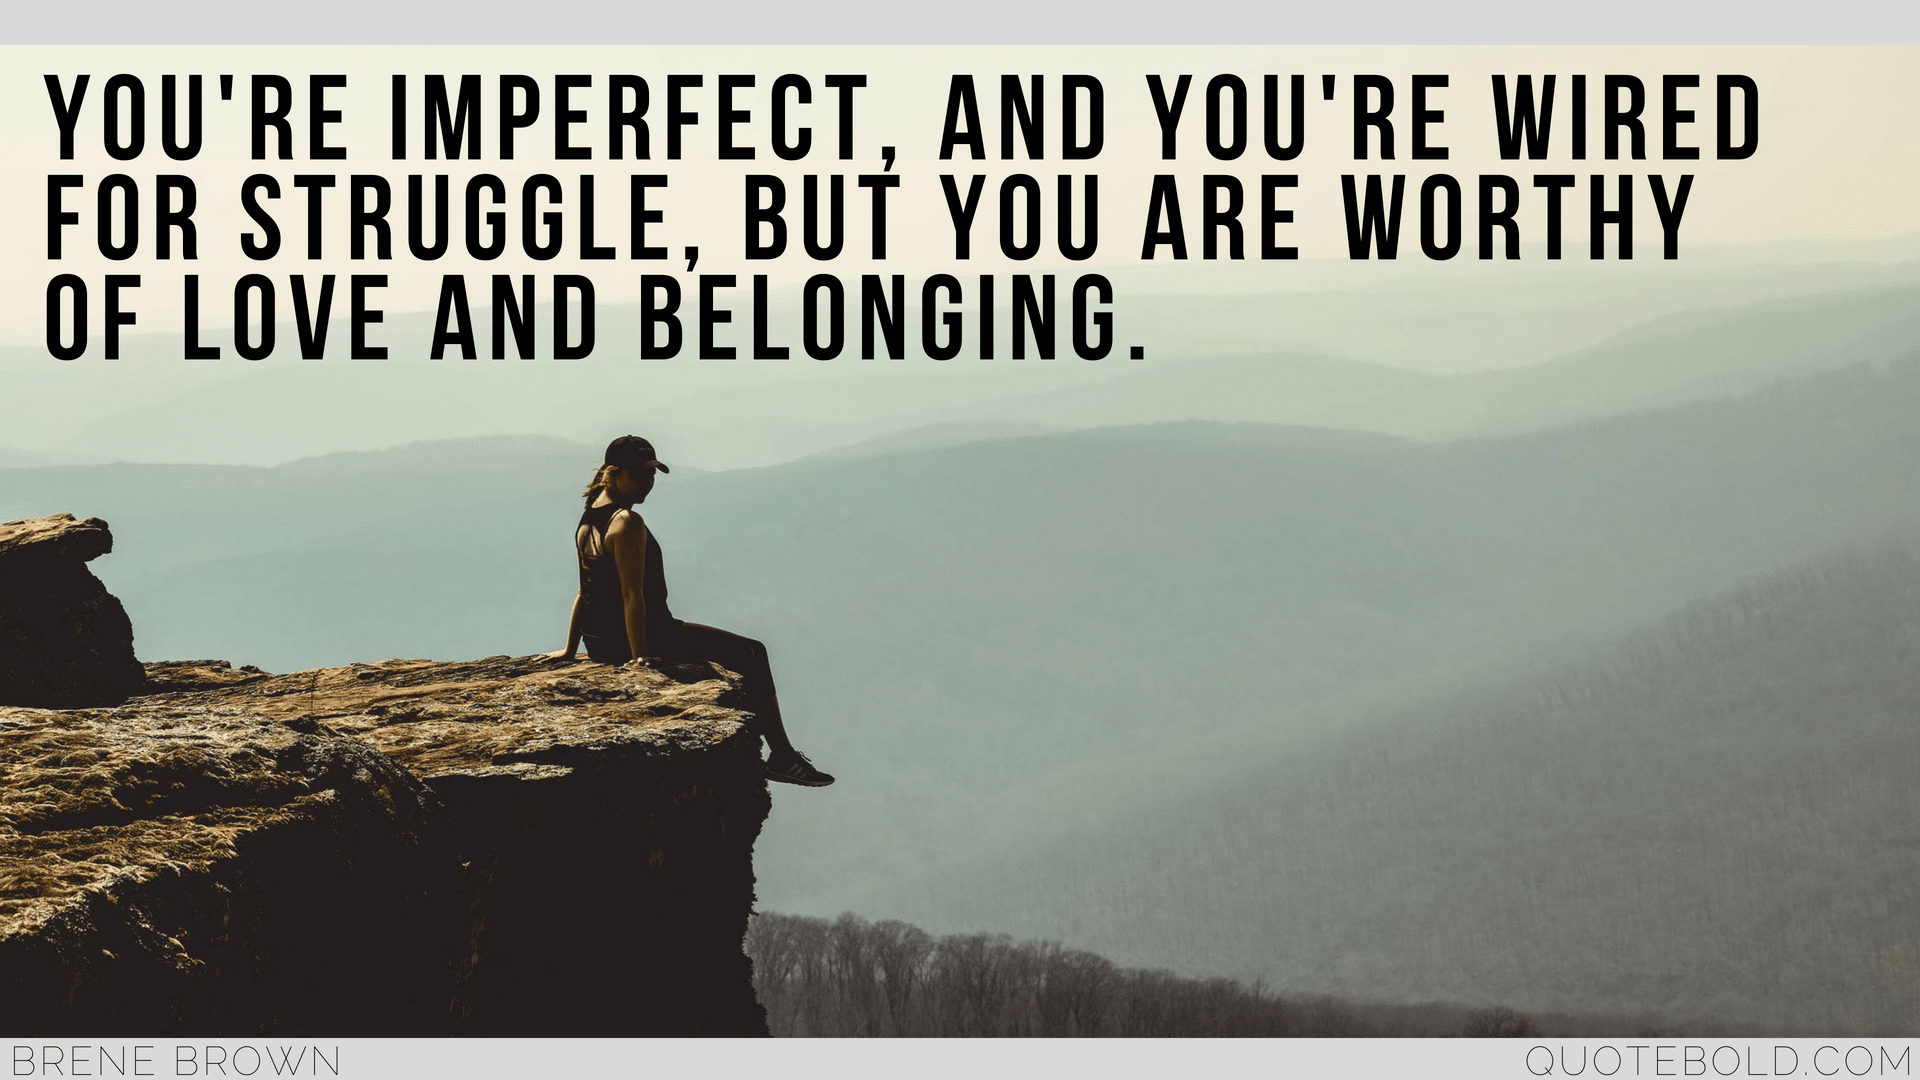 35+ Short Quotes about Struggle and Pain w/Images - QuoteBold